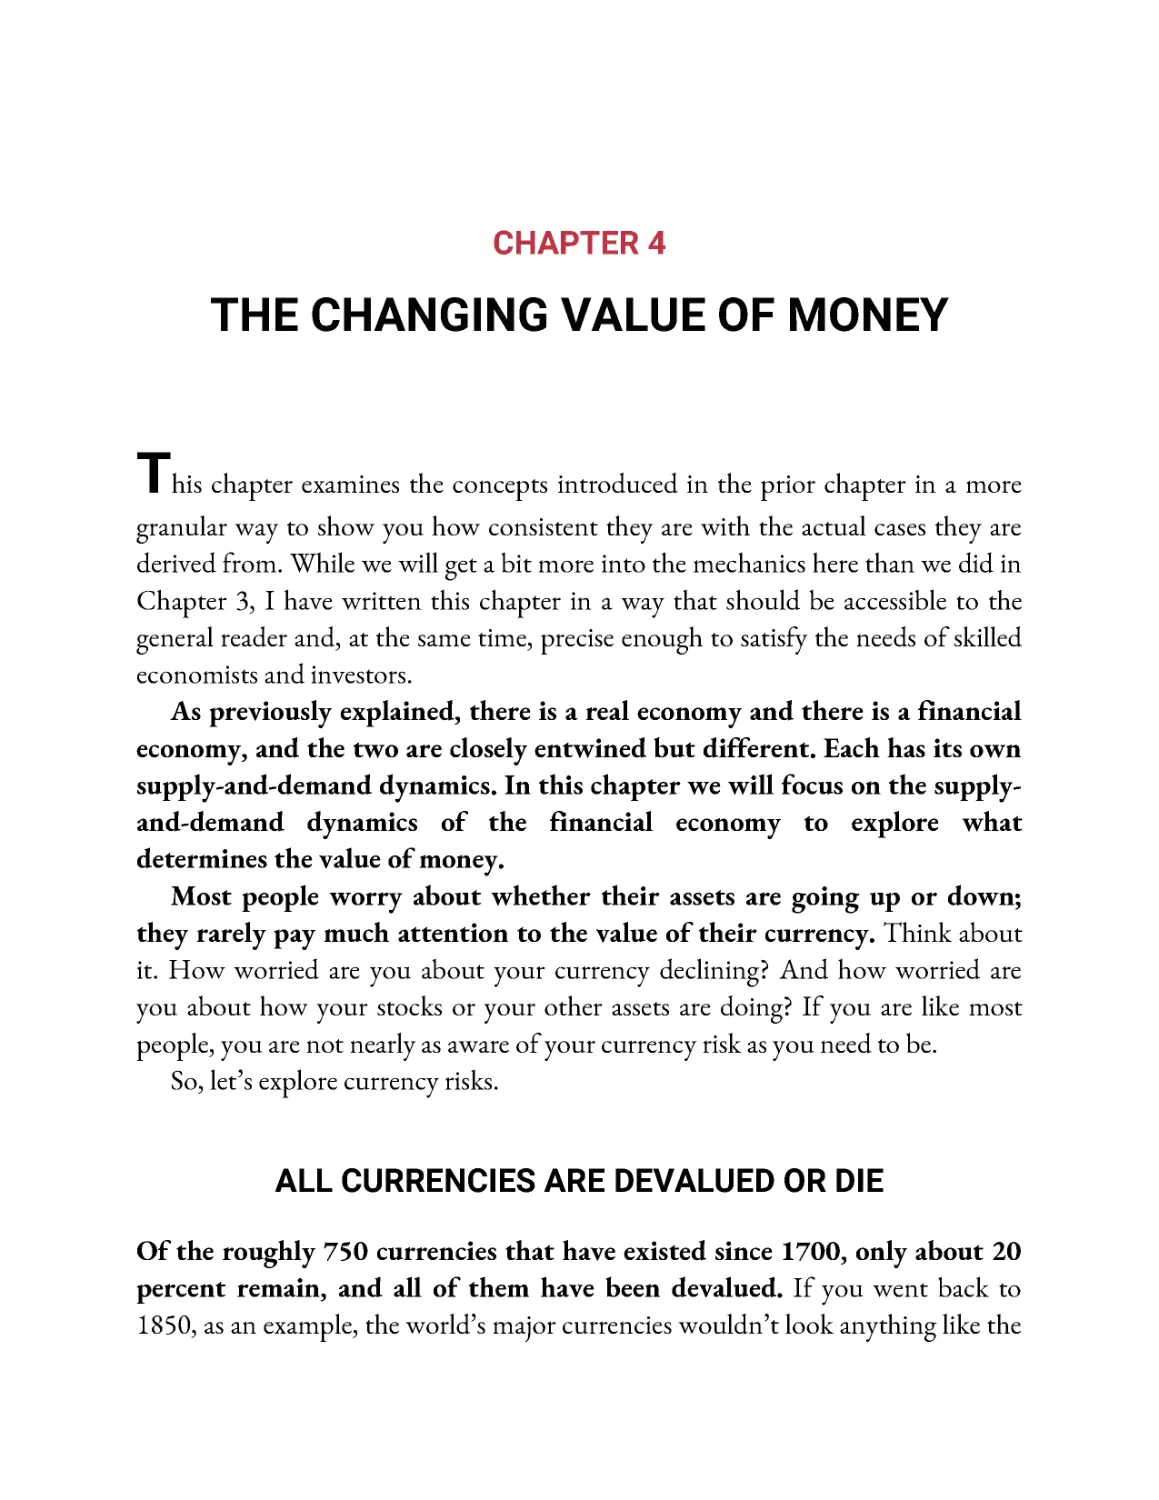 ﻿Chapter 4: The Changing Value of Mone